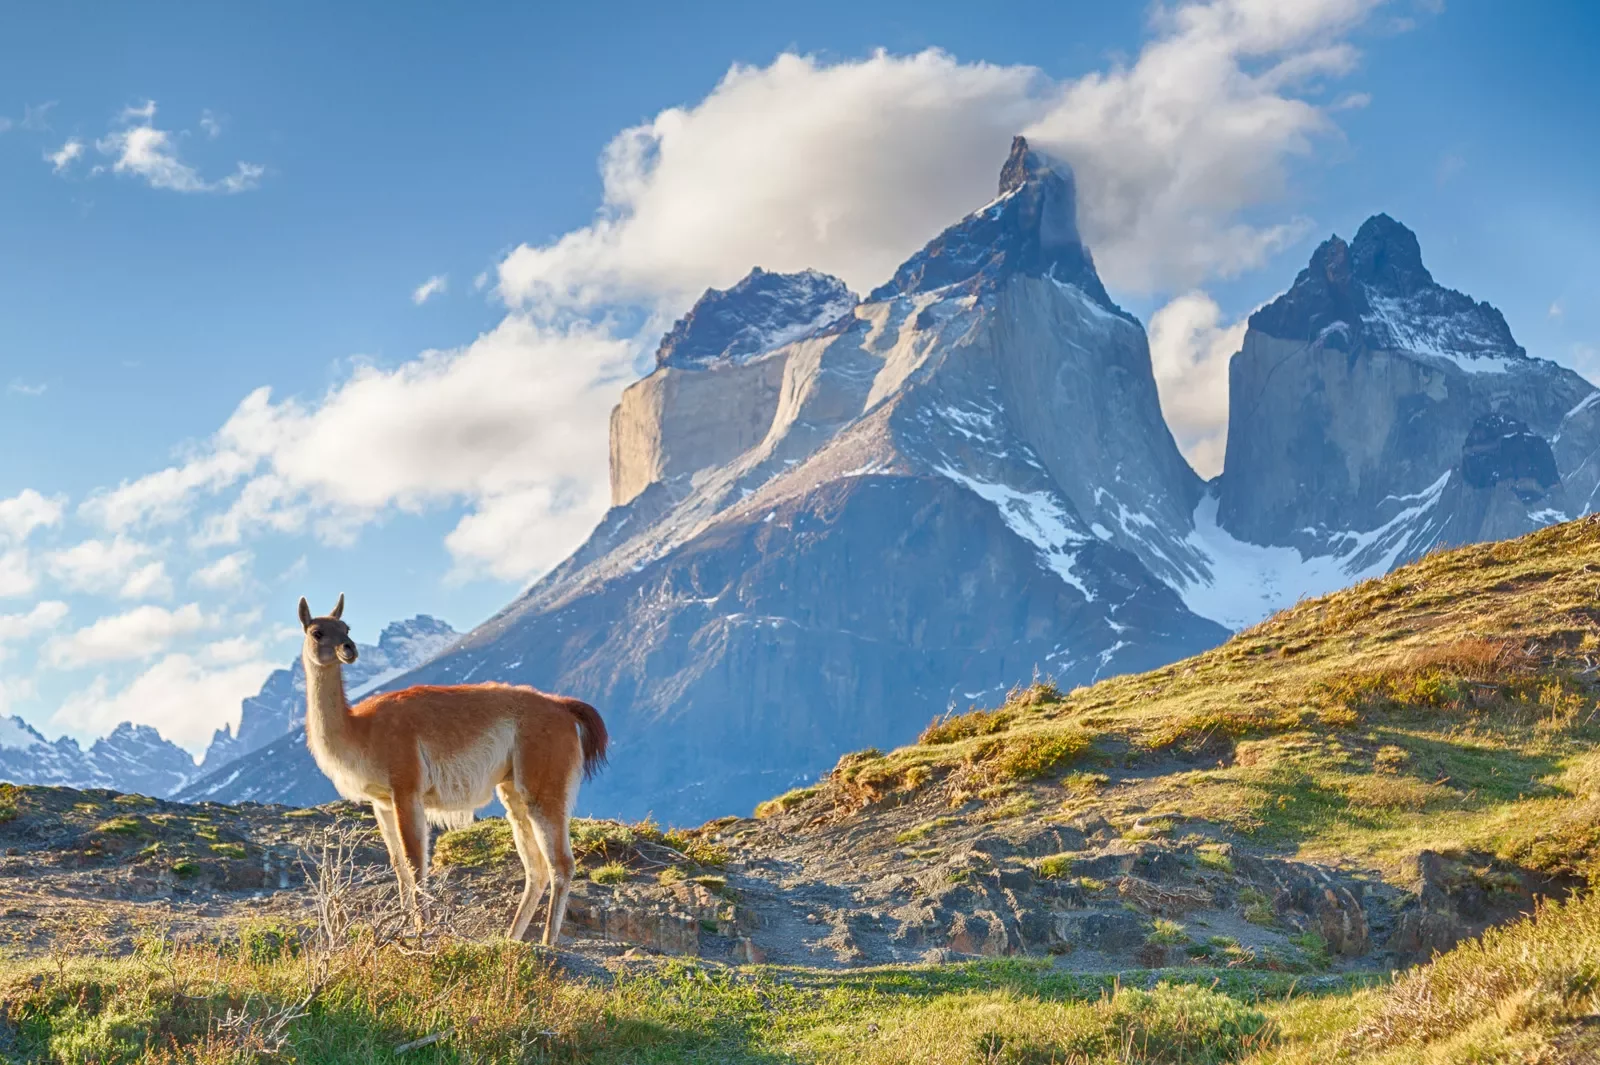 Alpaca in an empty valley with snow-capped mountains in the distance